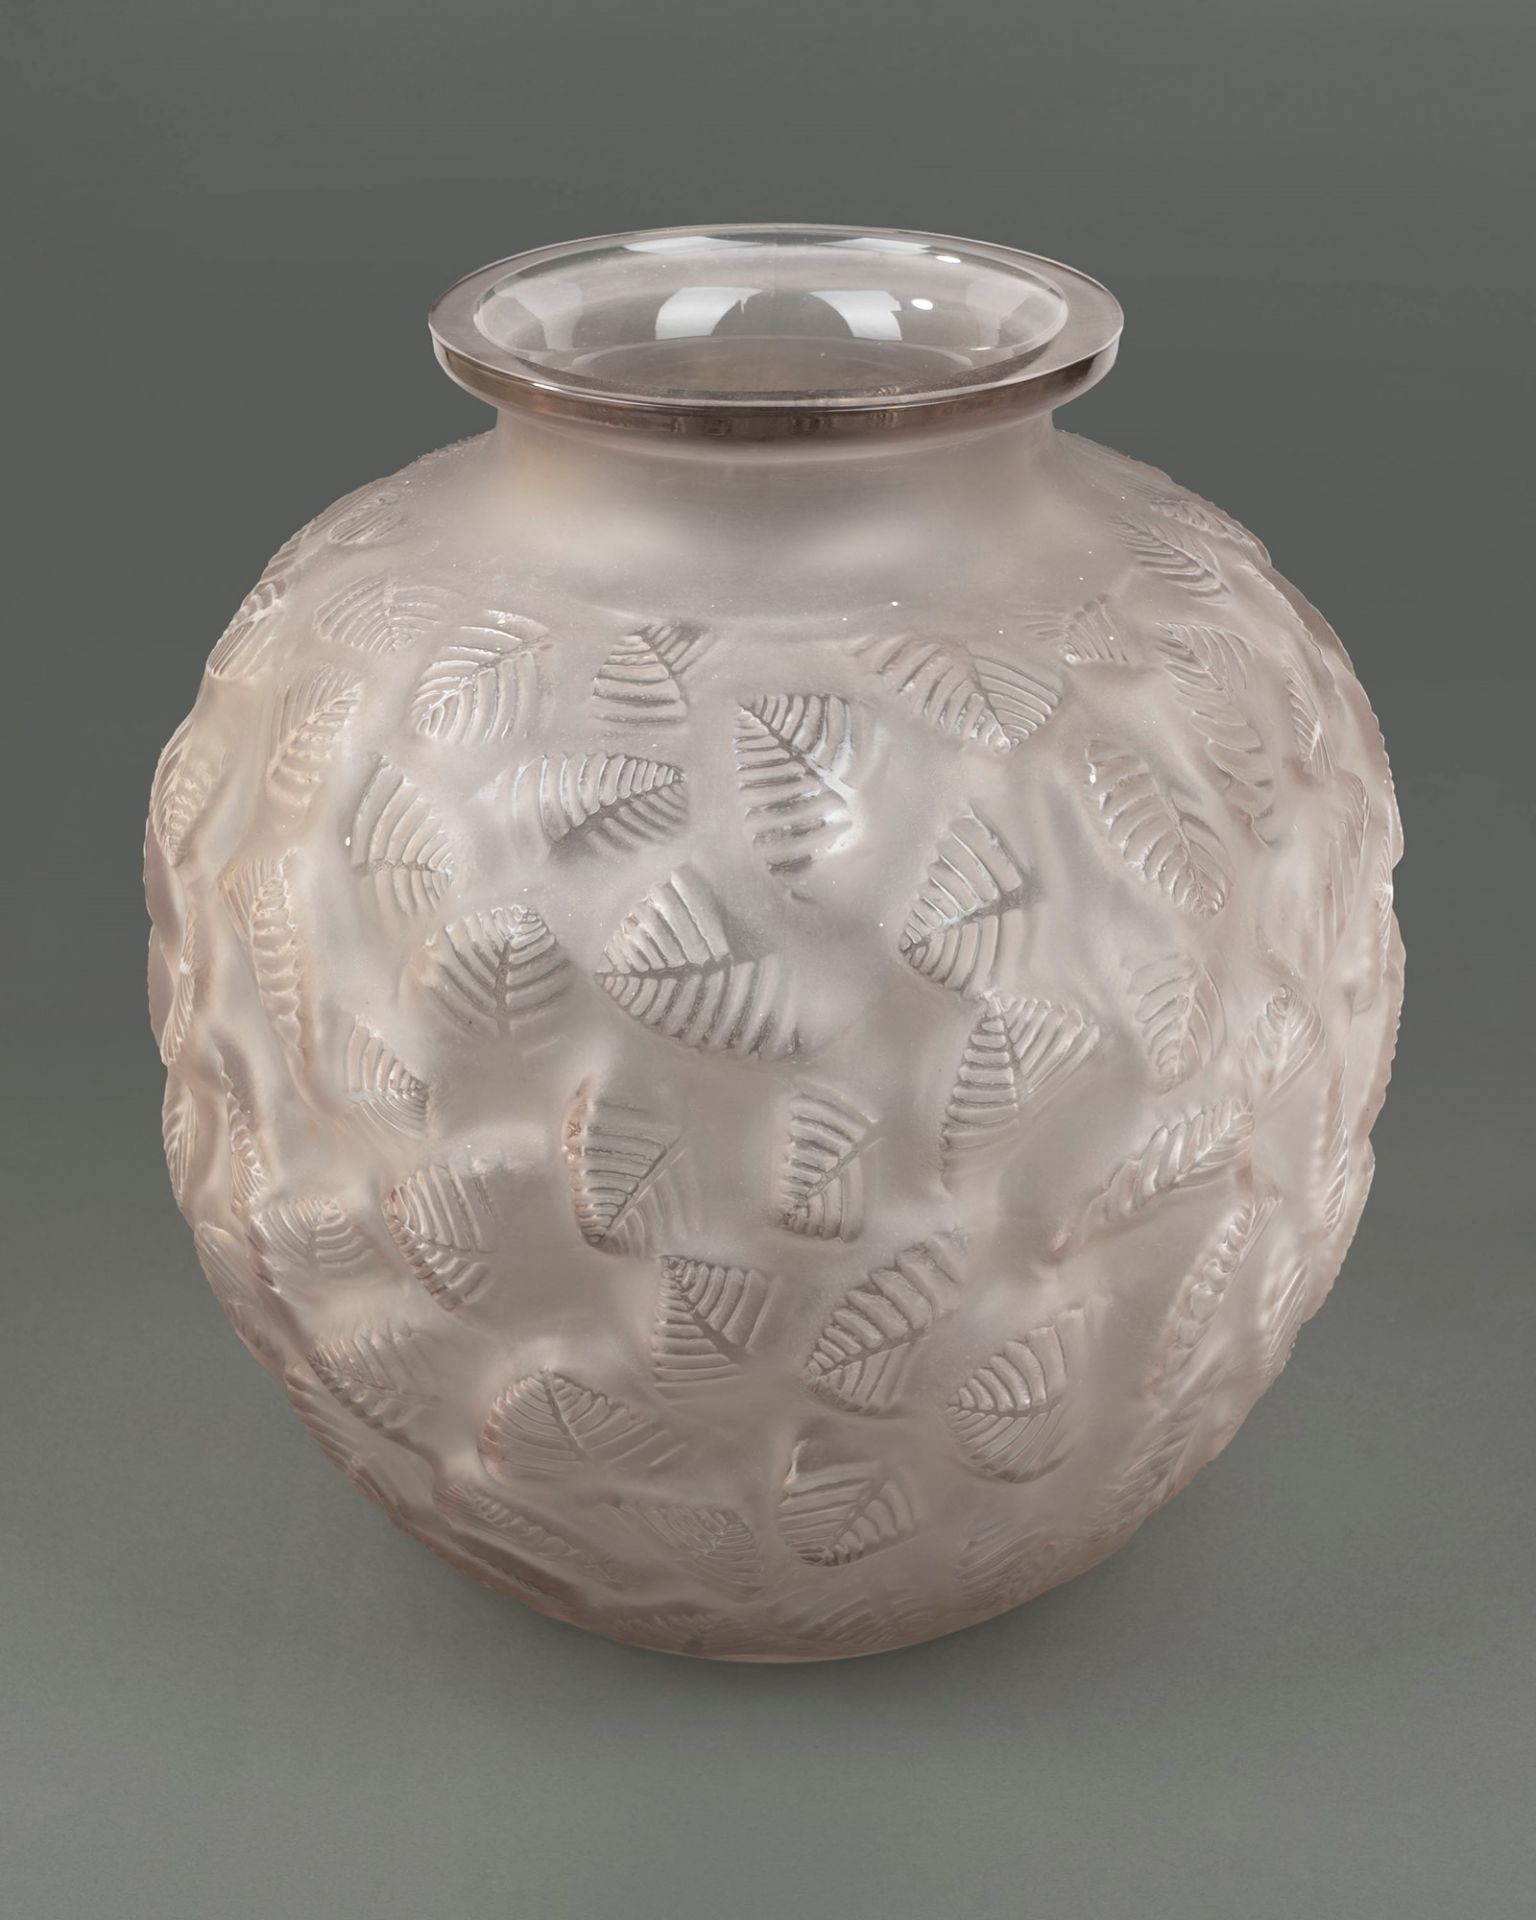 Lalique - Charmilles frosted glass vase, model 978, circa 1926